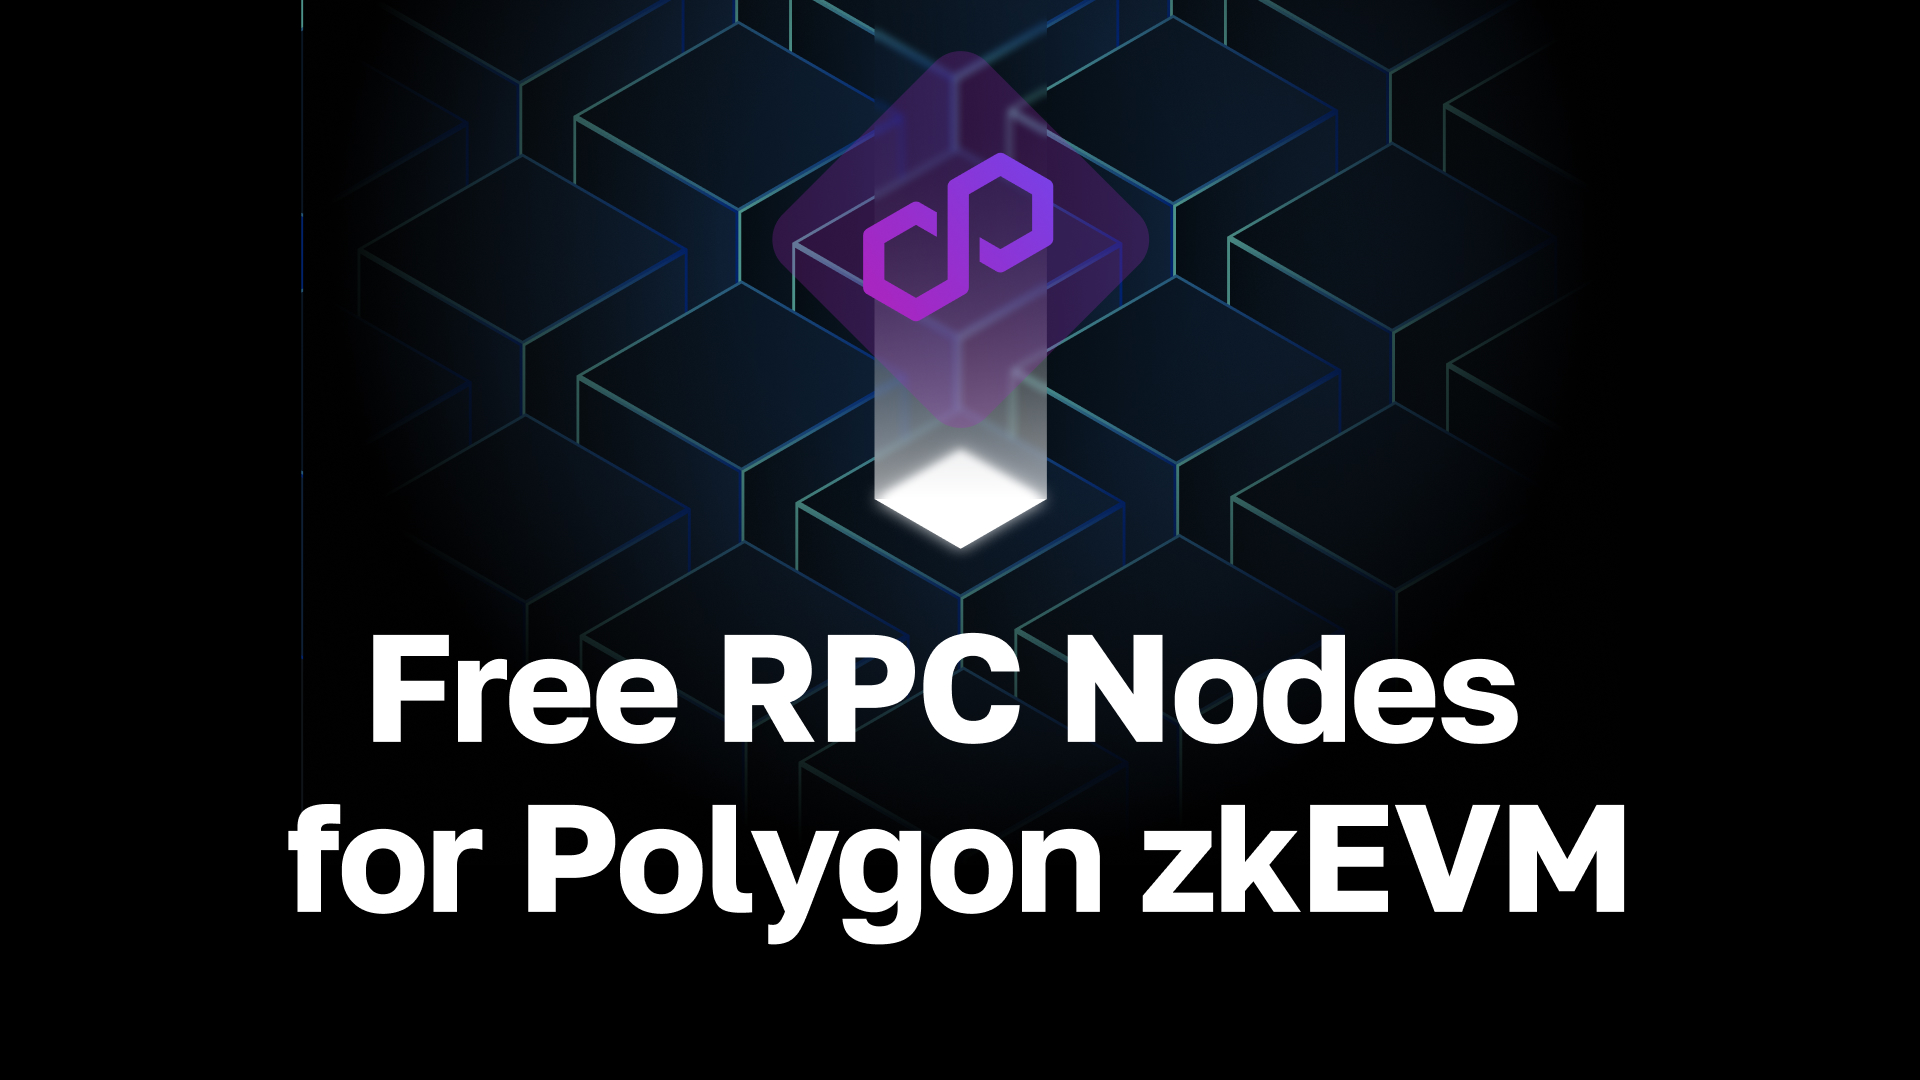 Text: "Free RPC Nodes for Polygon zkEVM"